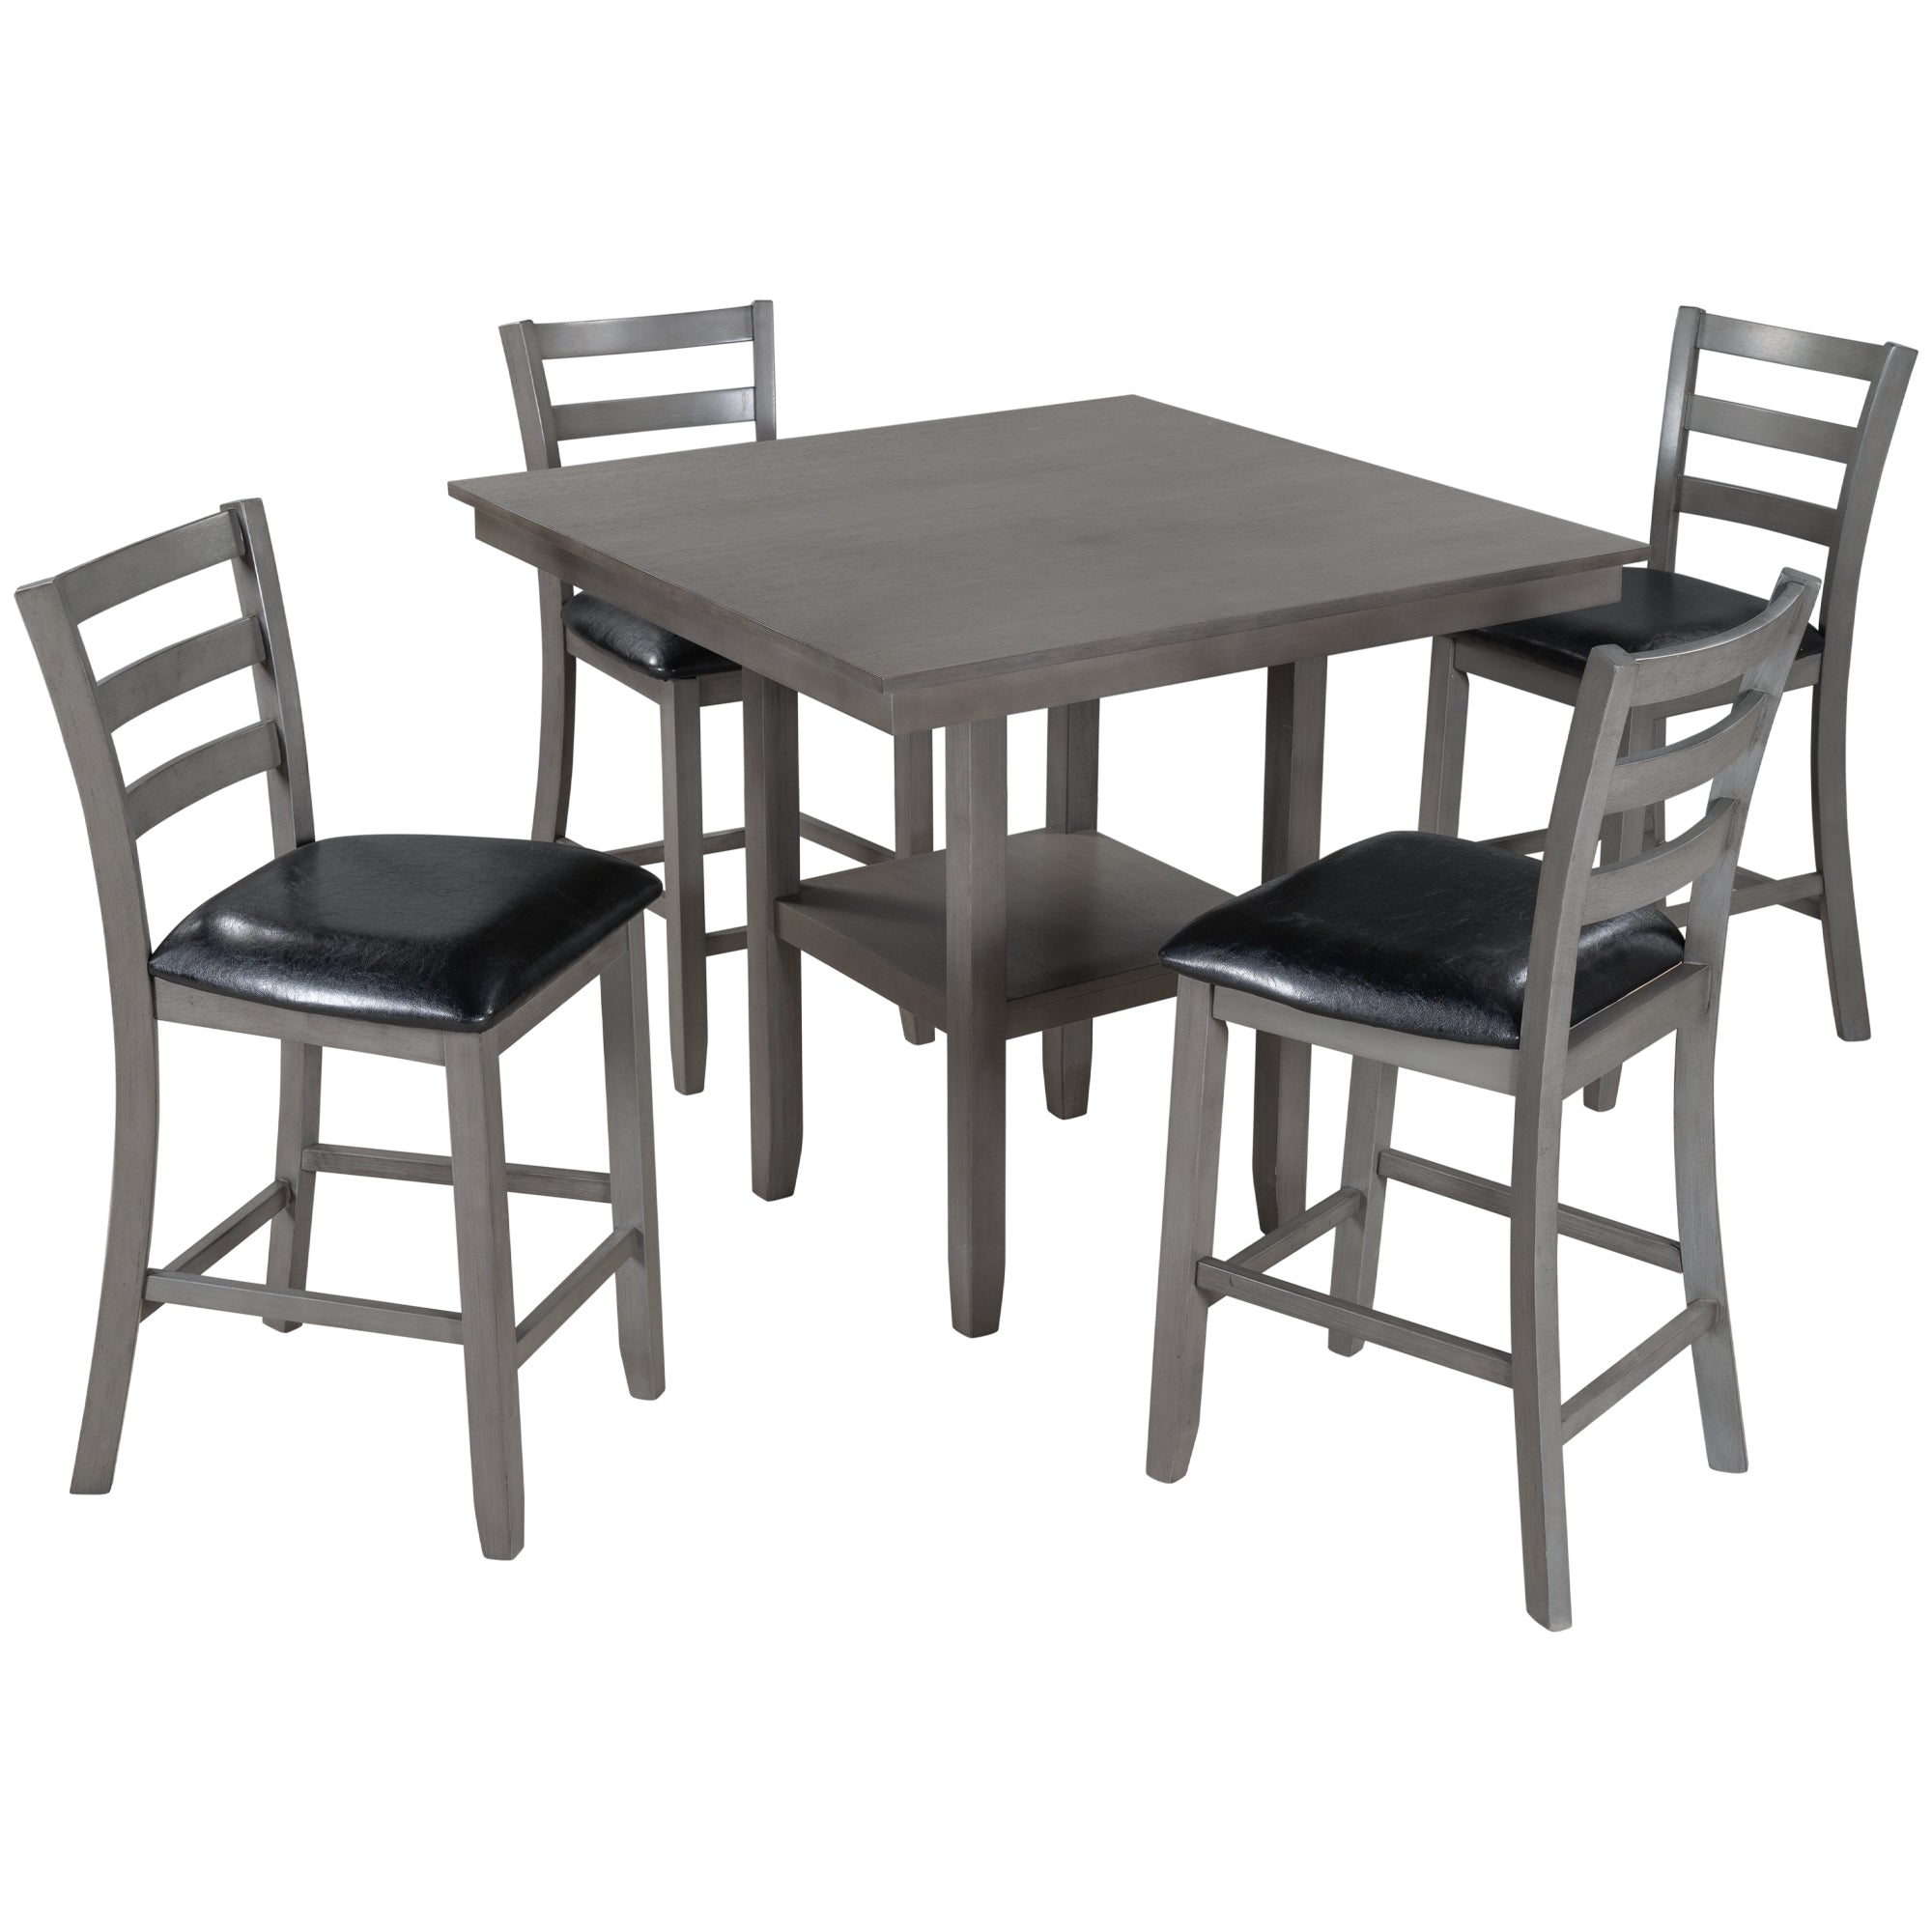 5-Piece Wooden Counter Height Dining Set with Padded Chairs and Storage Shelving-Boyel Living